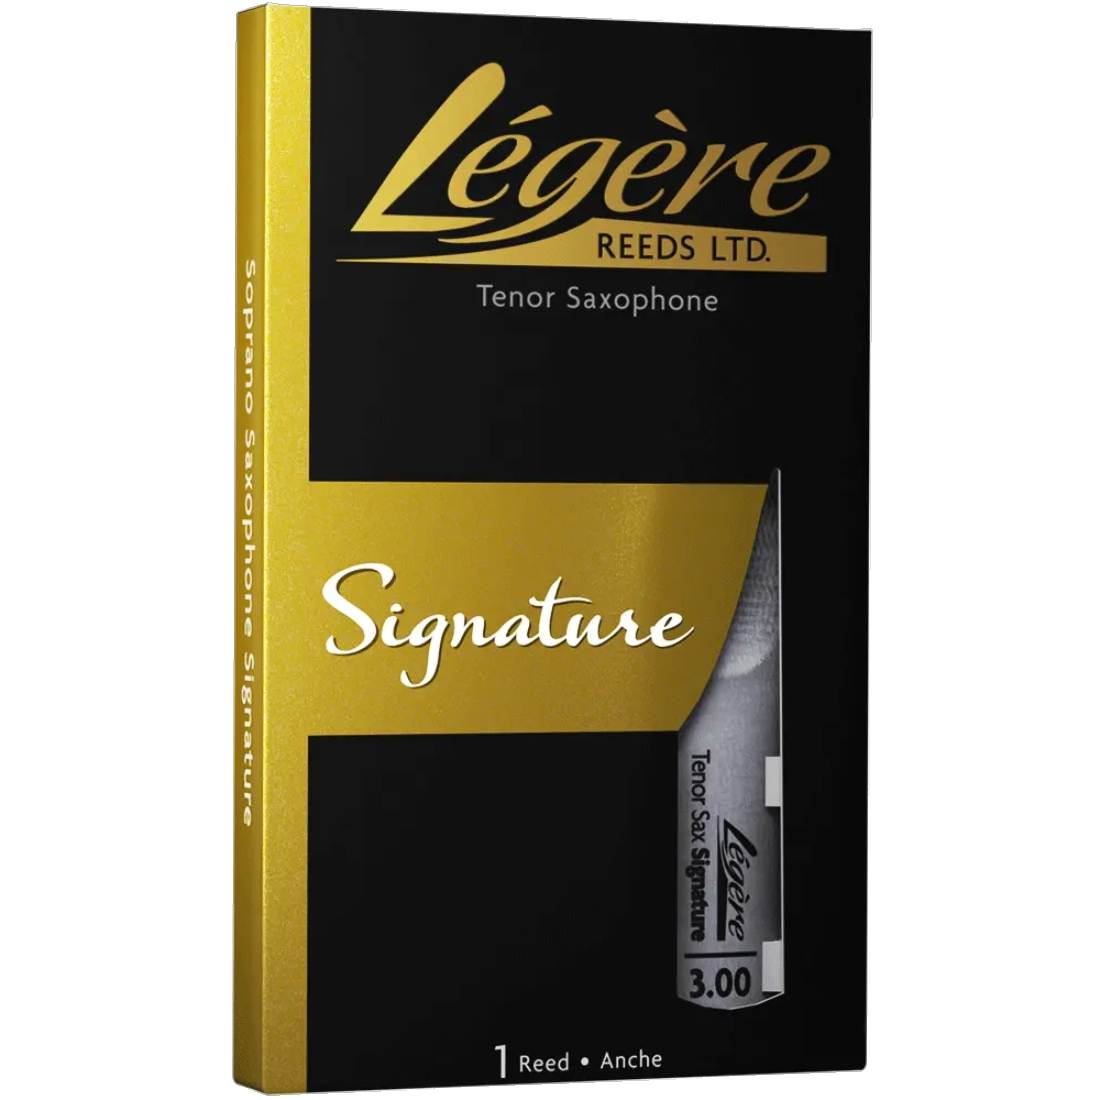 Black and yellow box of signature Legere synthetic tenor sax reeds